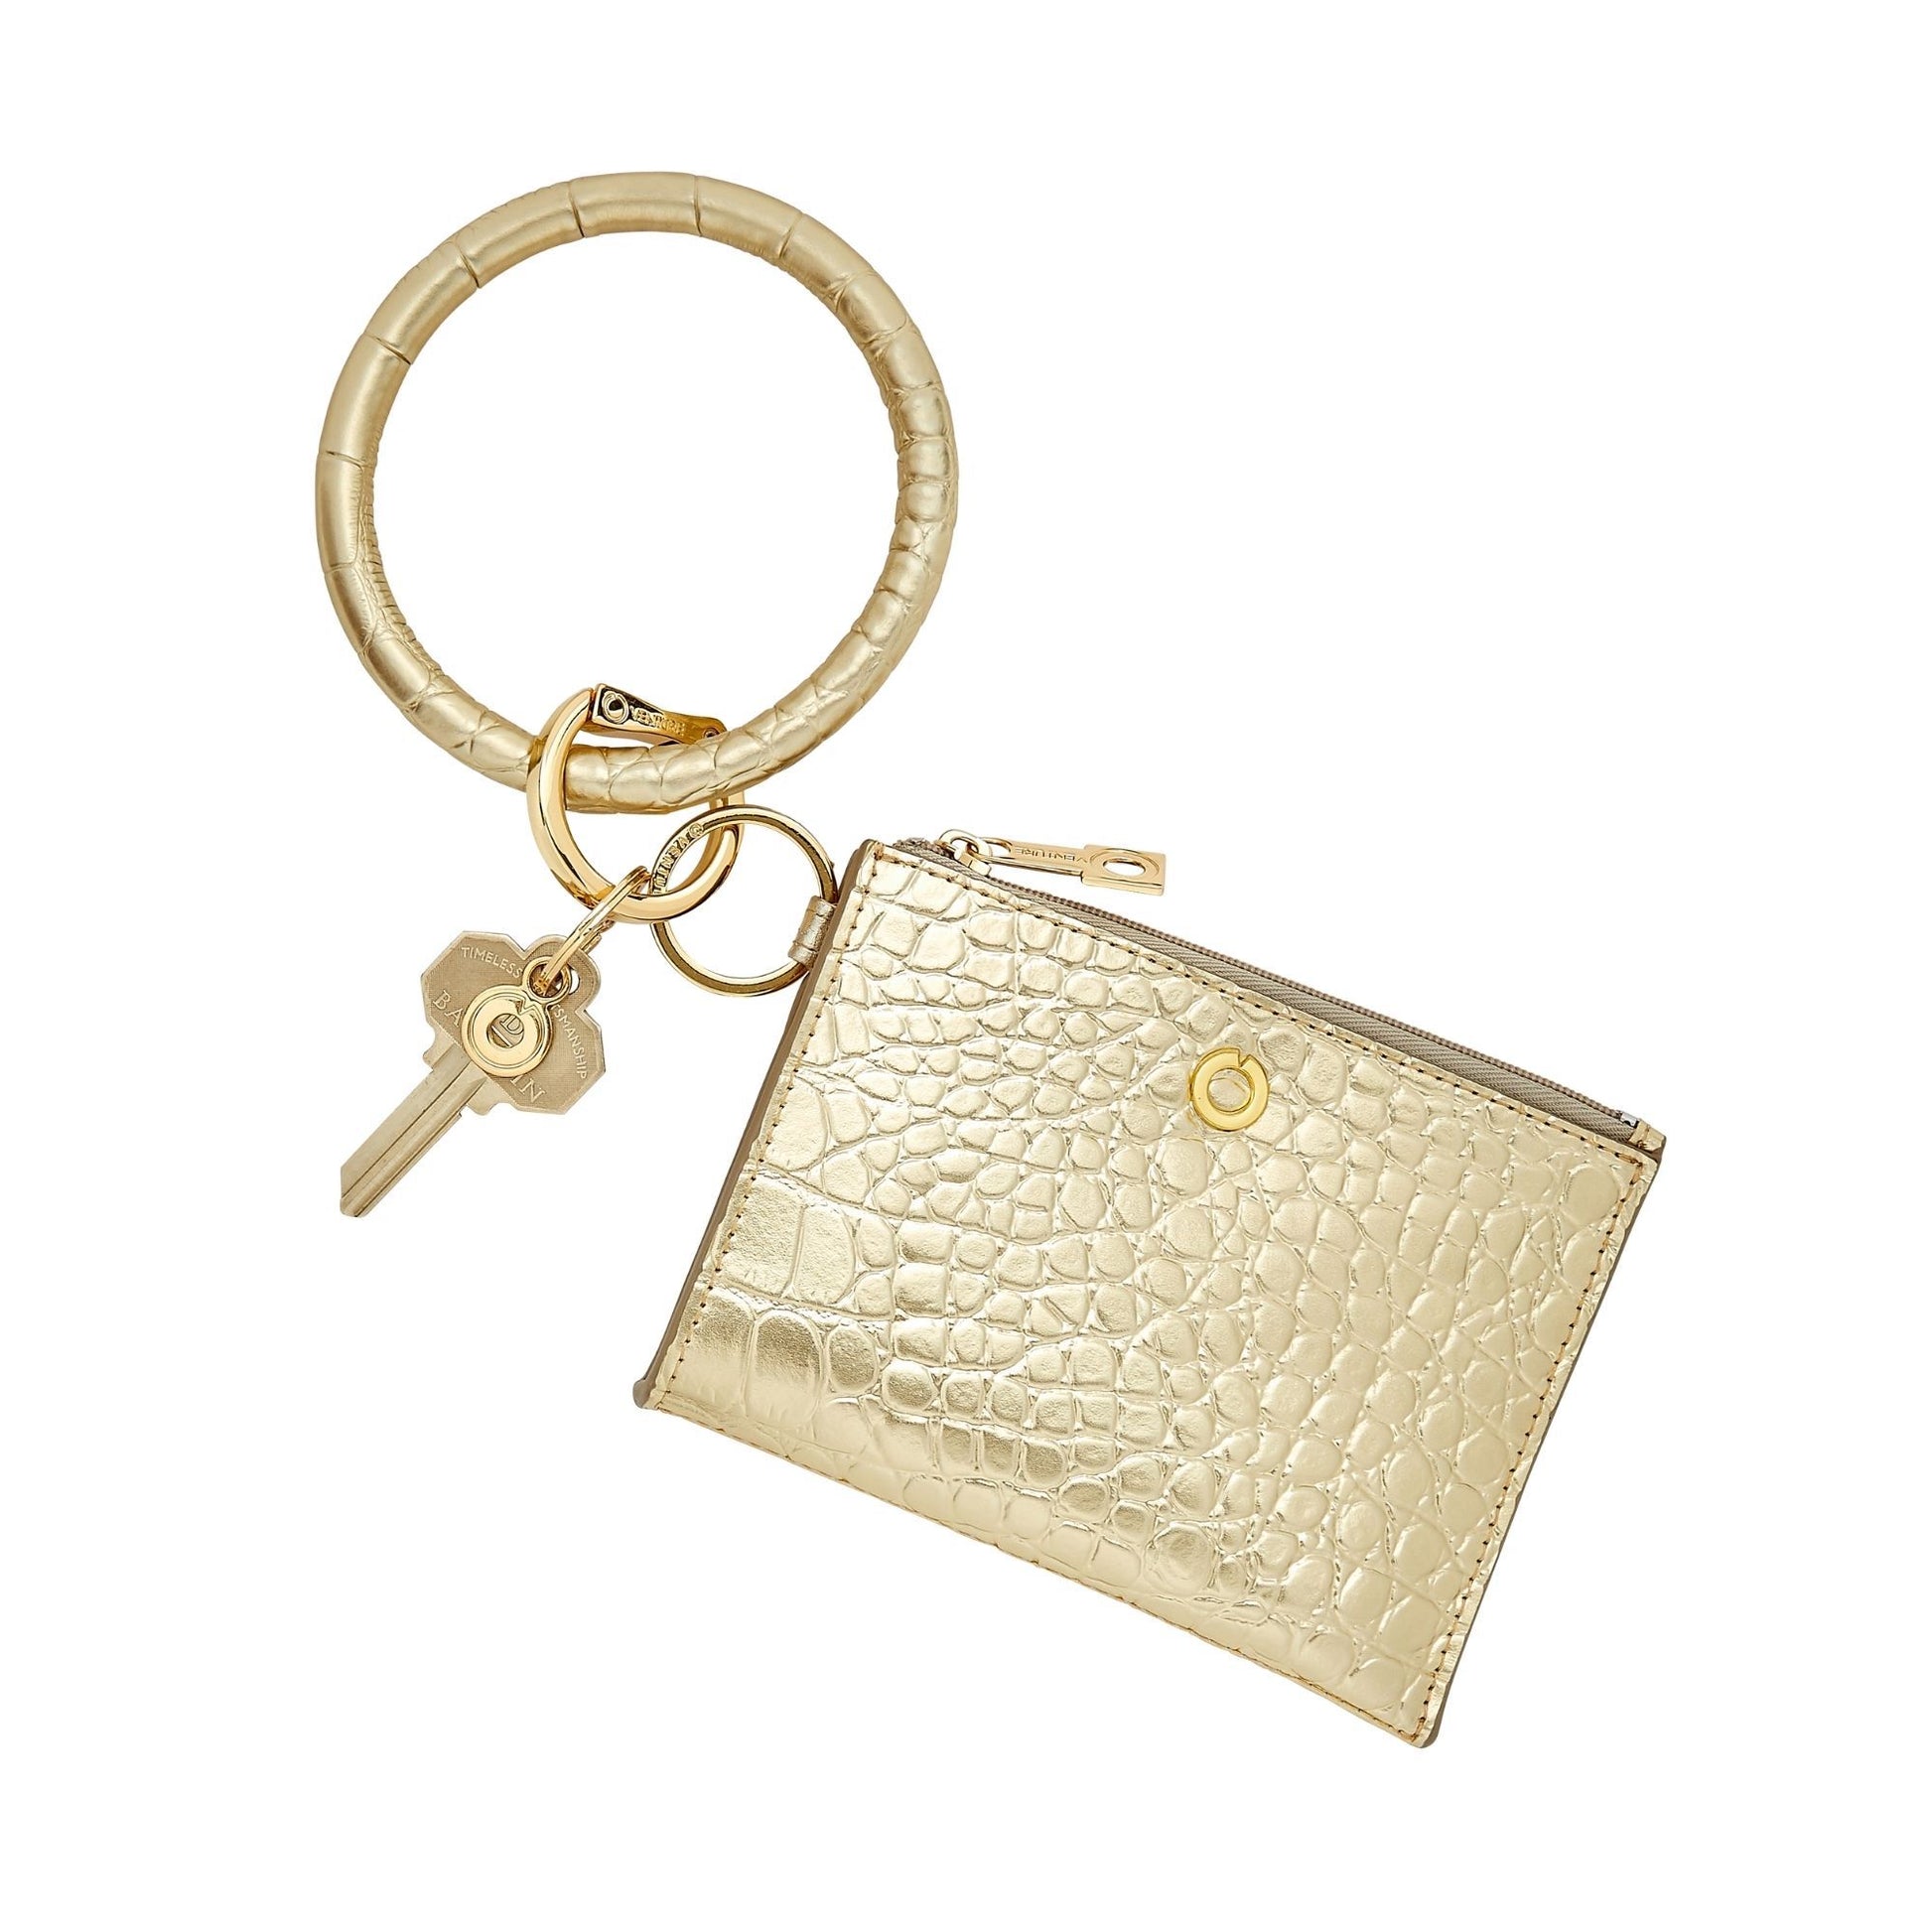 Gold Leather Keychain Wallet attached to the bangle bracelet keyring in gold leather.